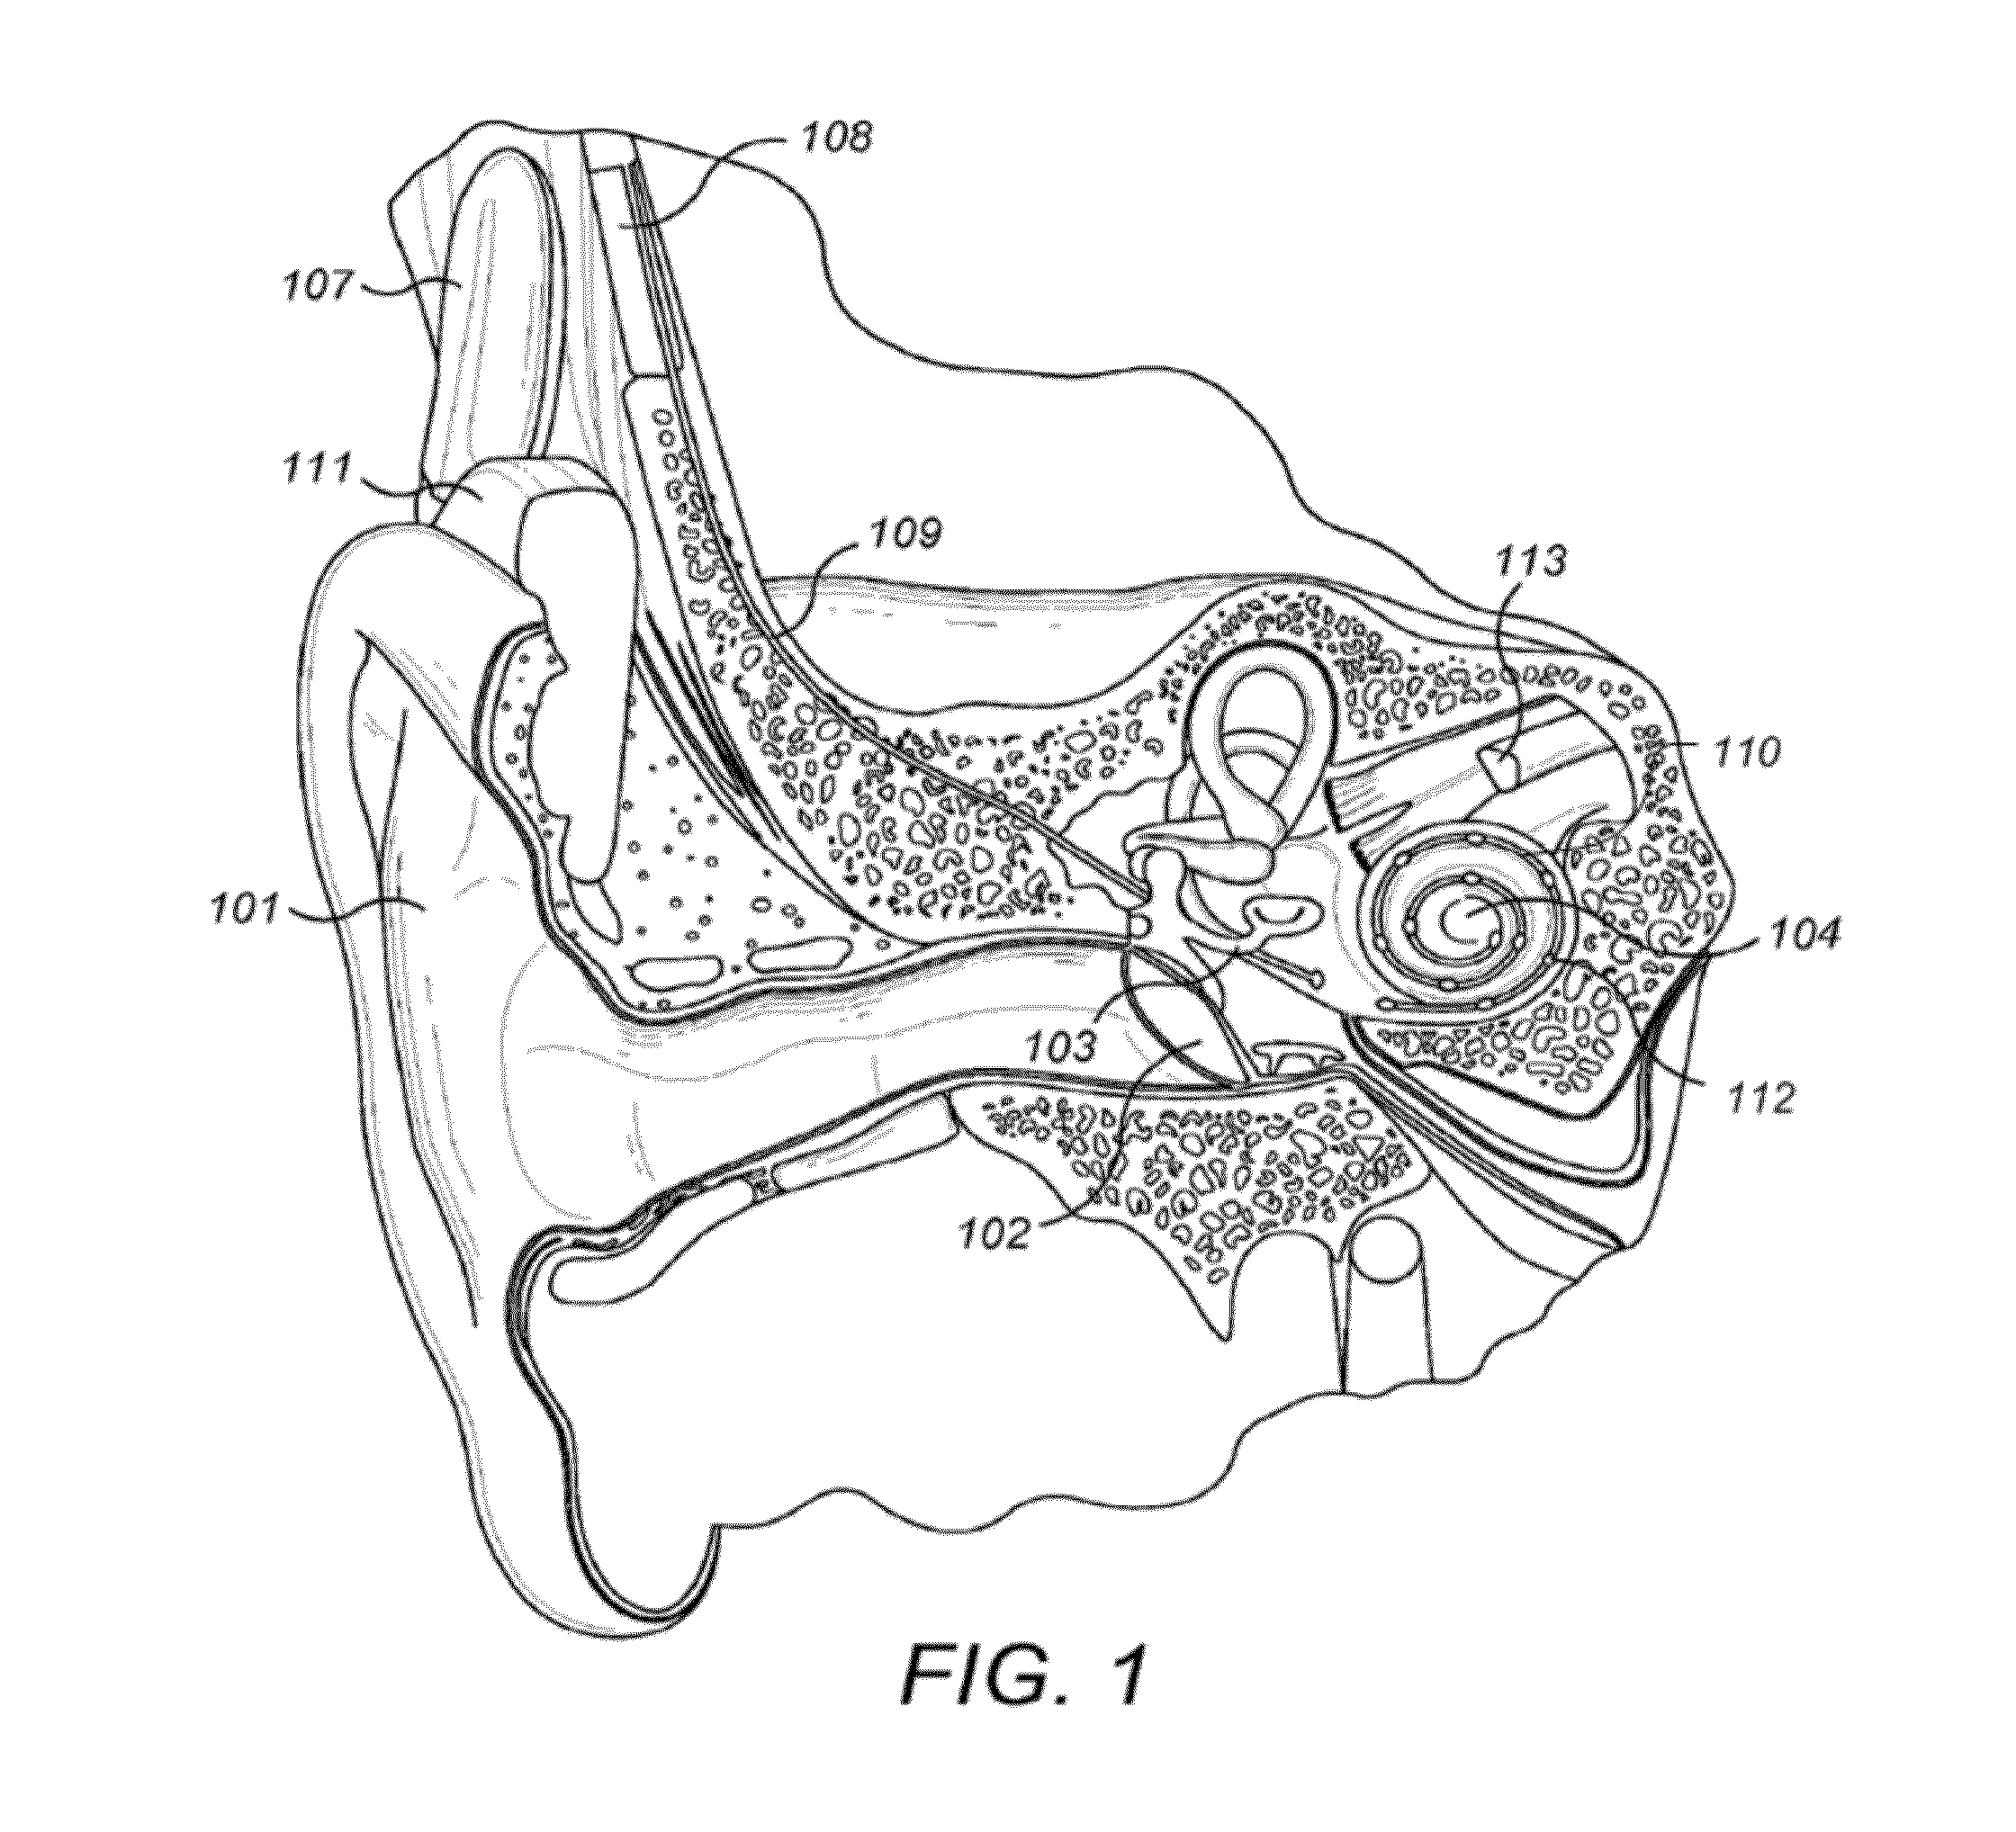 Reduction of Transient Sounds in Hearing Implants